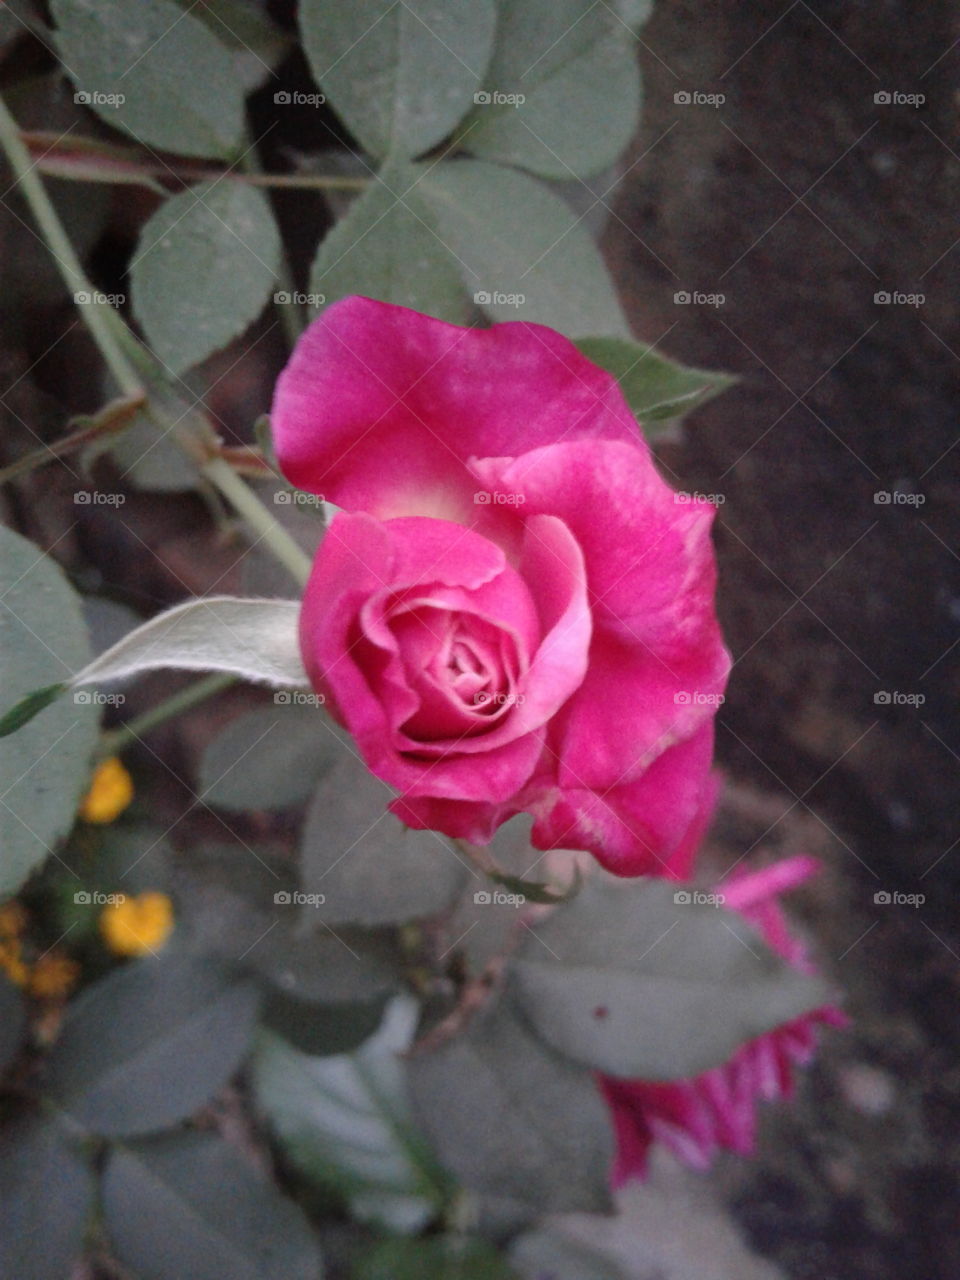 the flower wide angle lens pic in beautiful rose